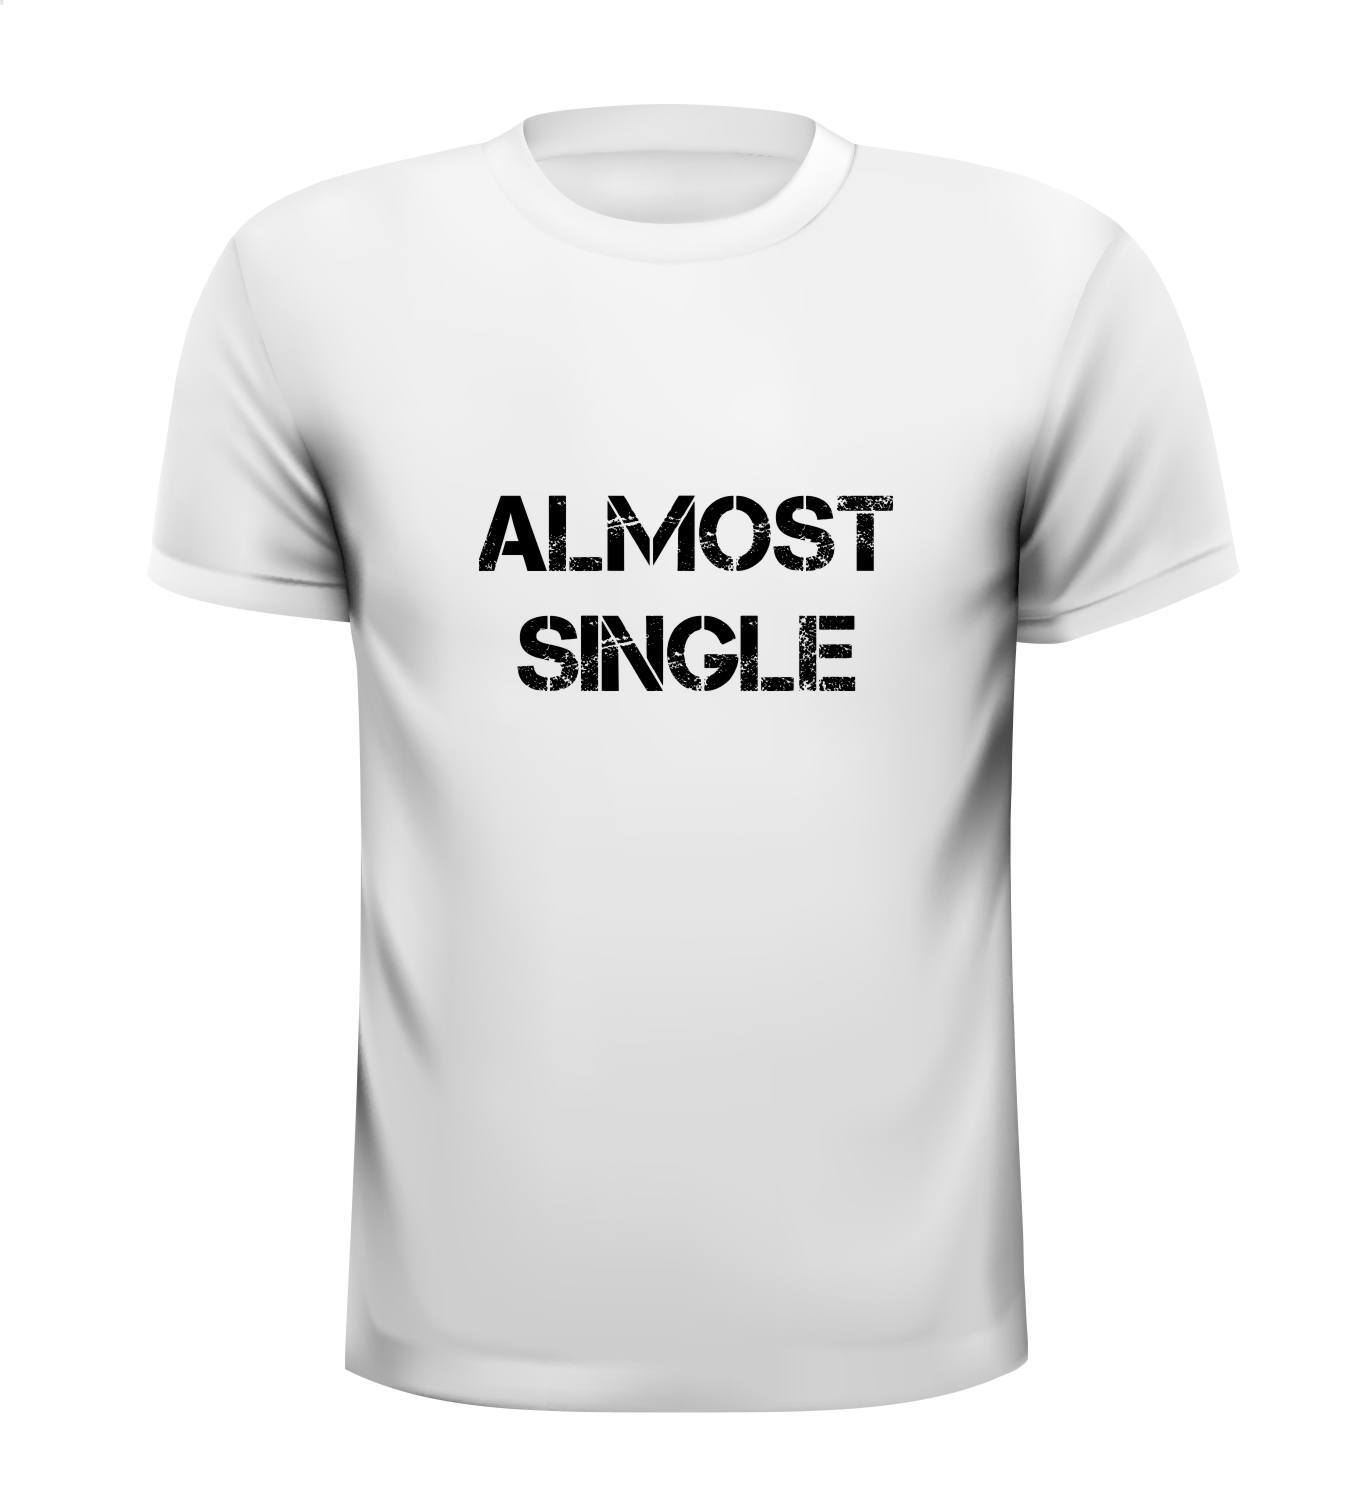 Almost single T-shirt